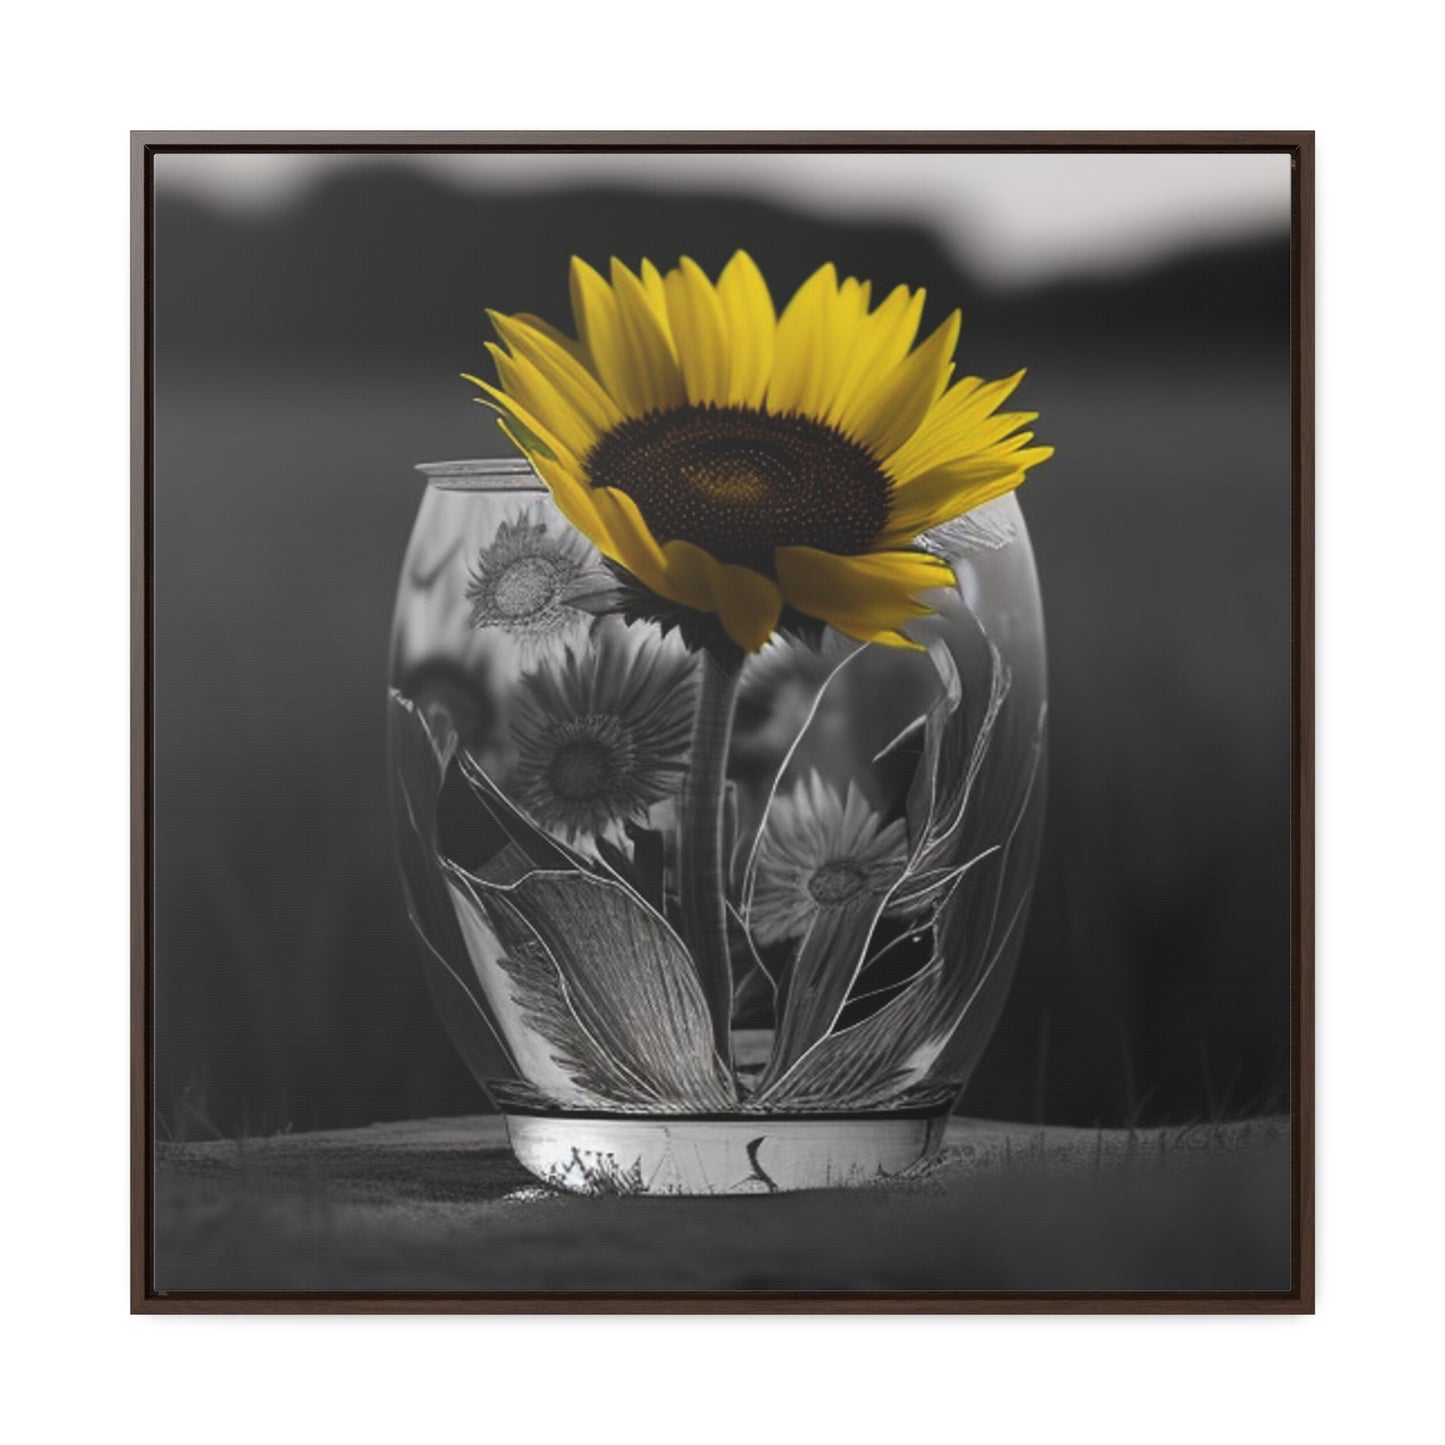 Gallery Canvas Wraps, Square Frame Yellw Sunflower in a vase 1